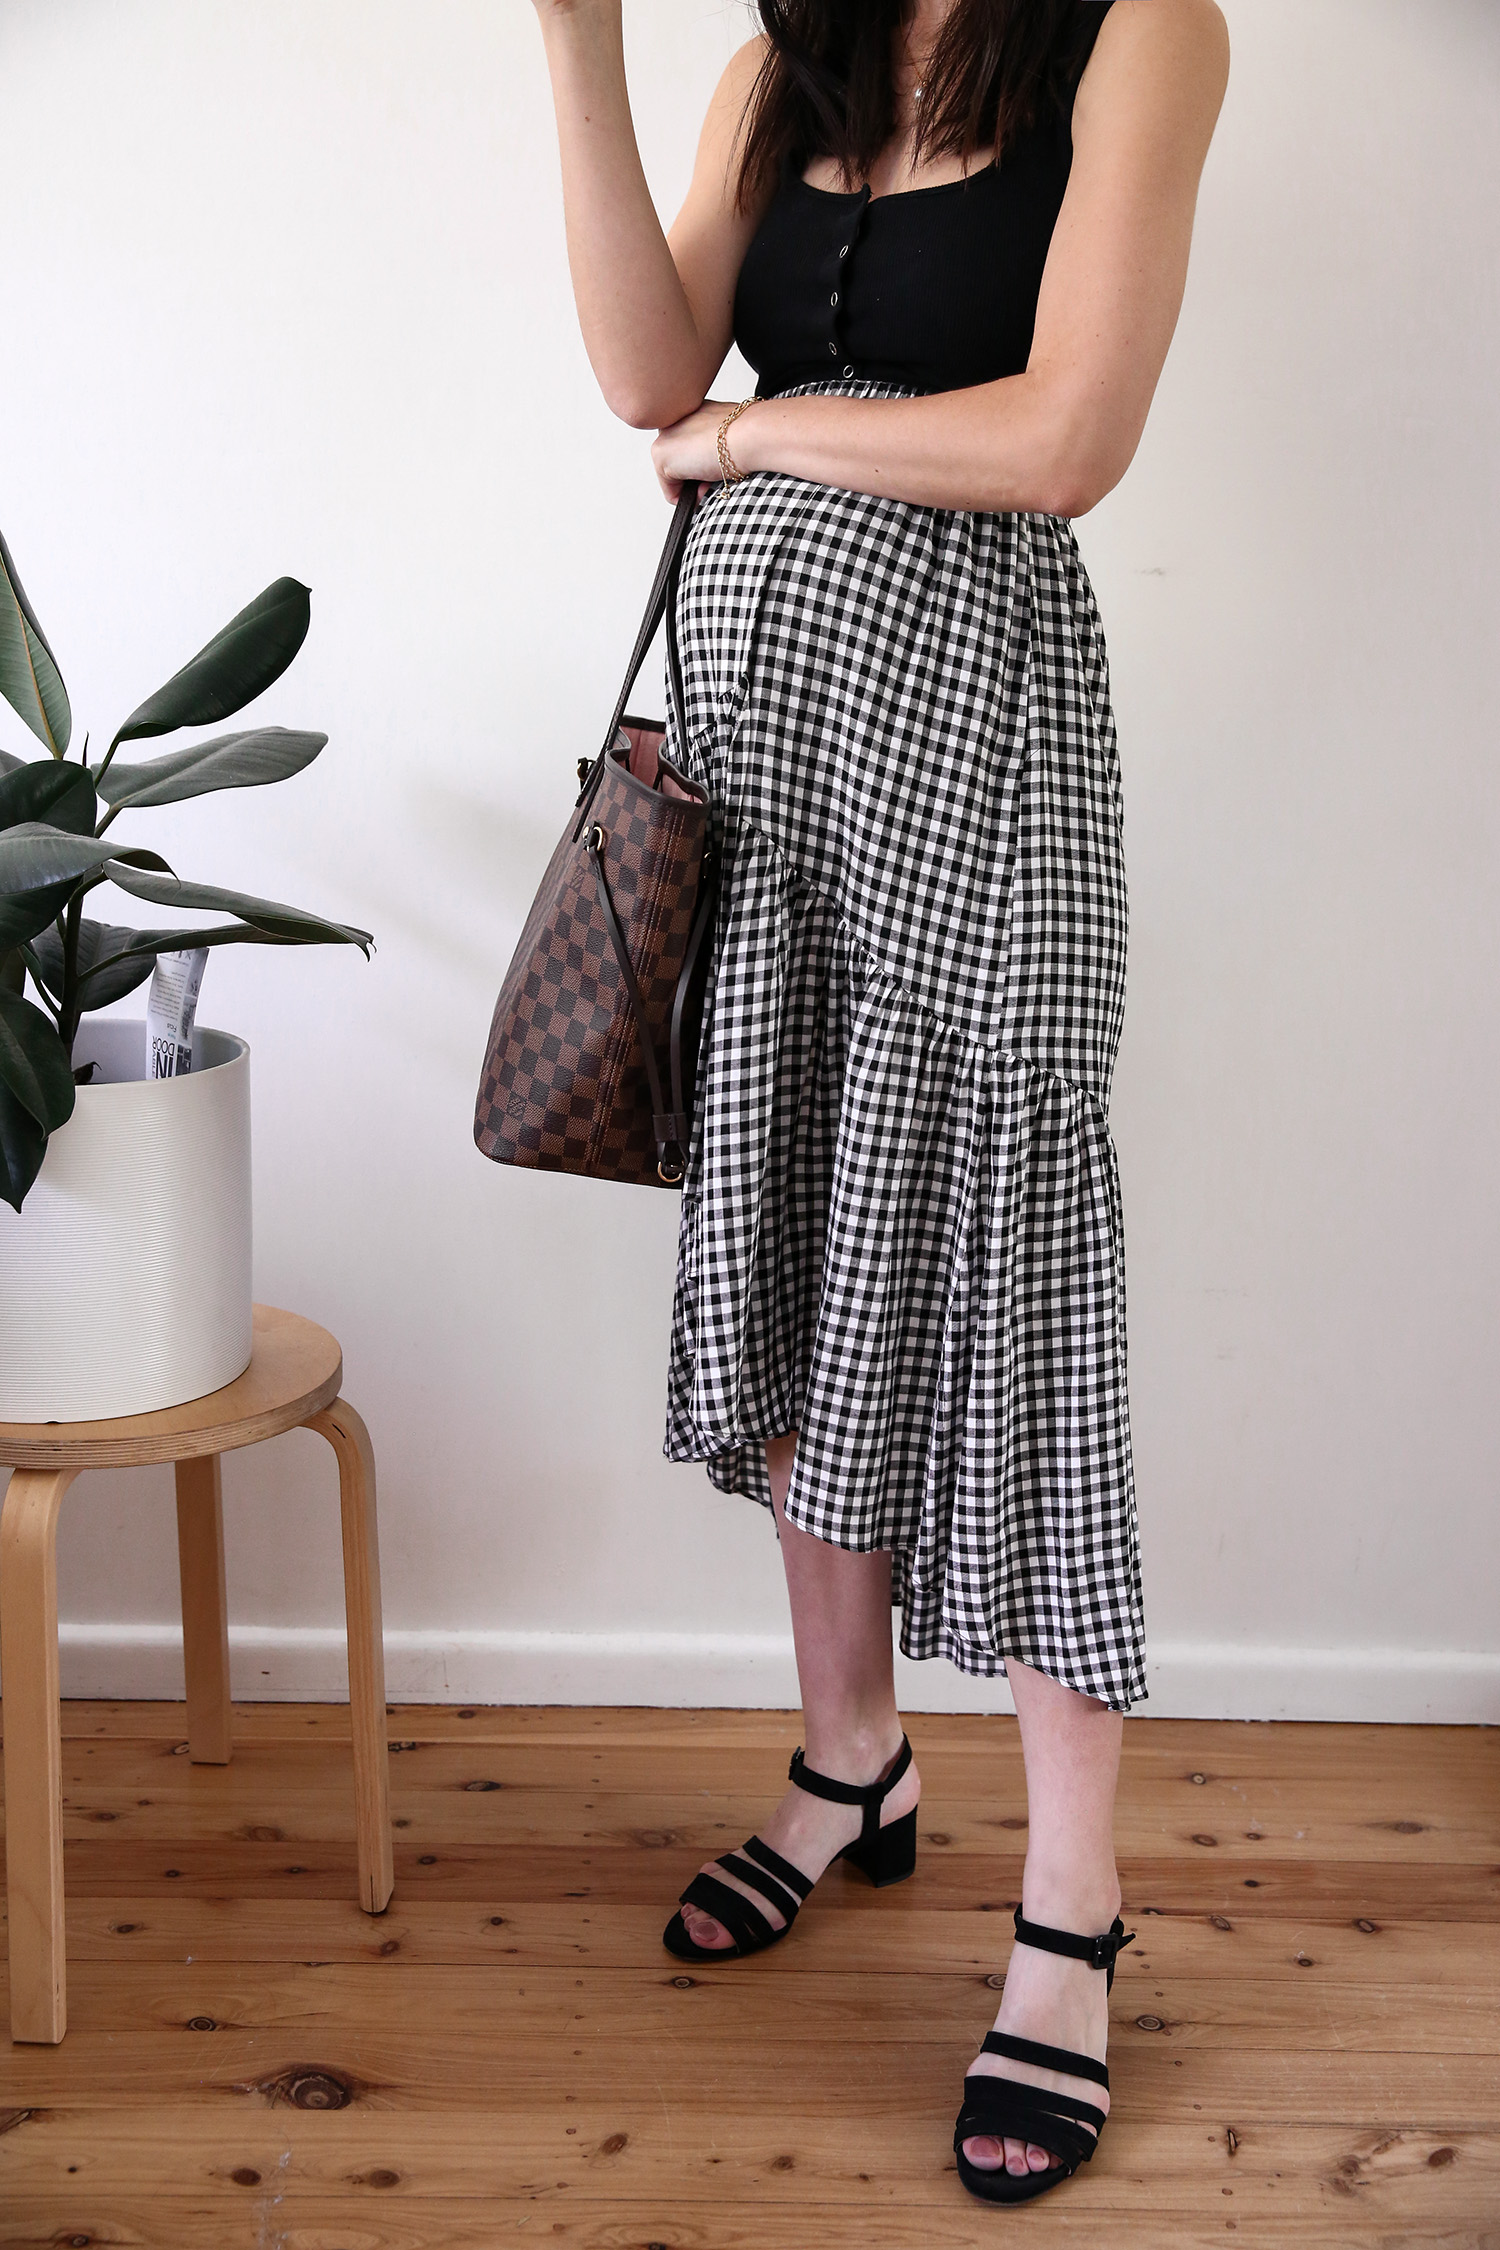 Maternity style wearing a black tank and gingham midi skirt